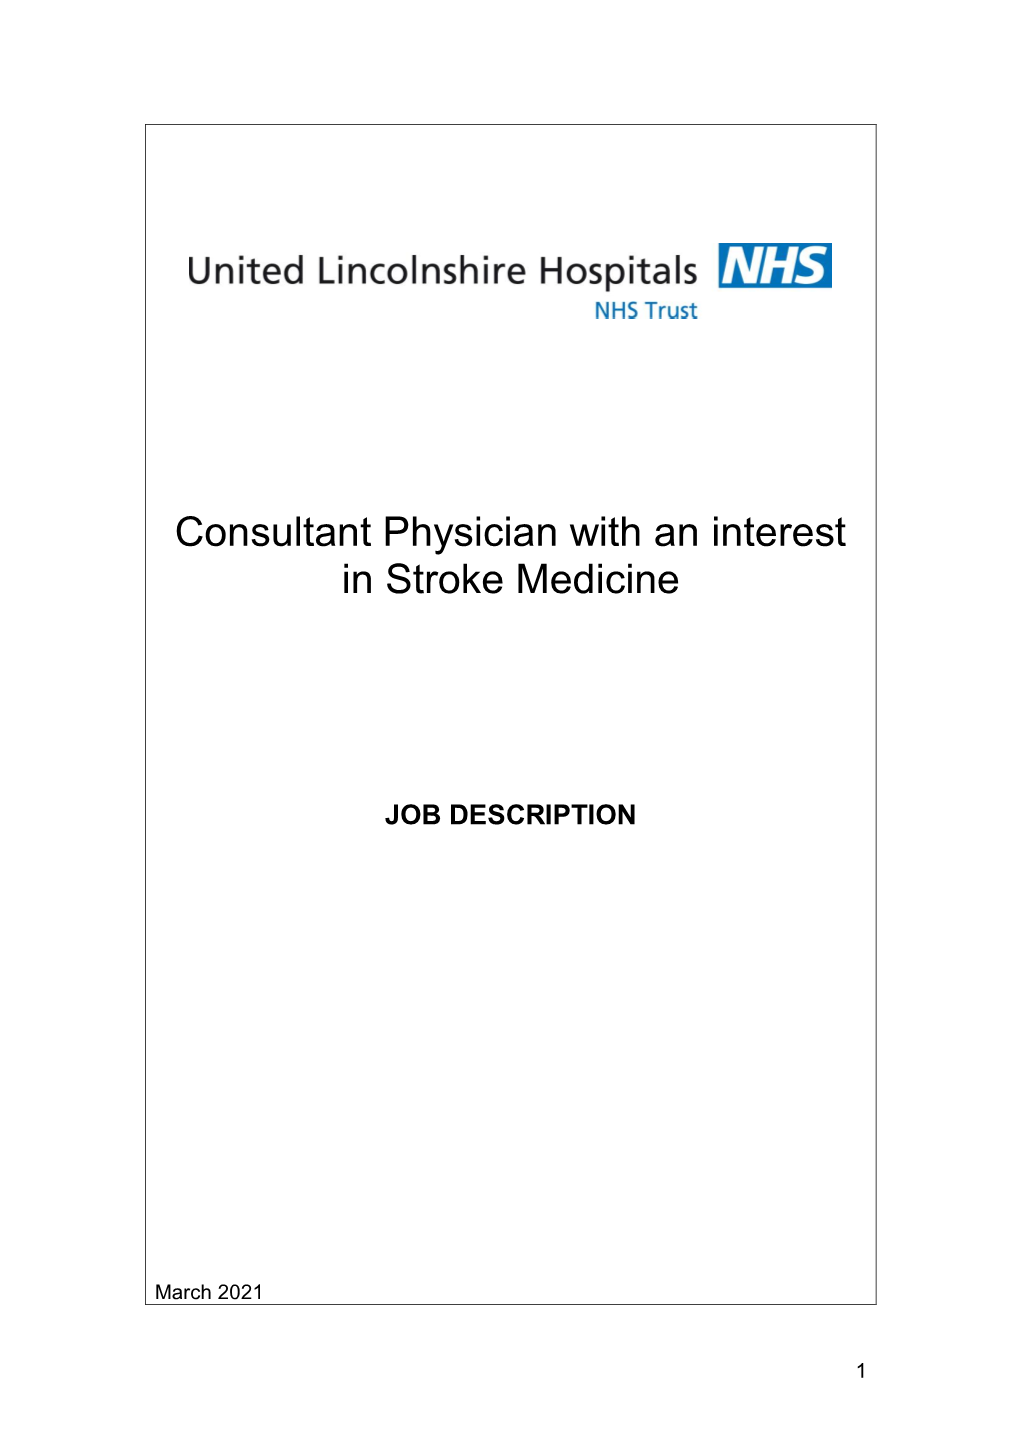 Consultant Physician with an Interest in Stroke Medicine